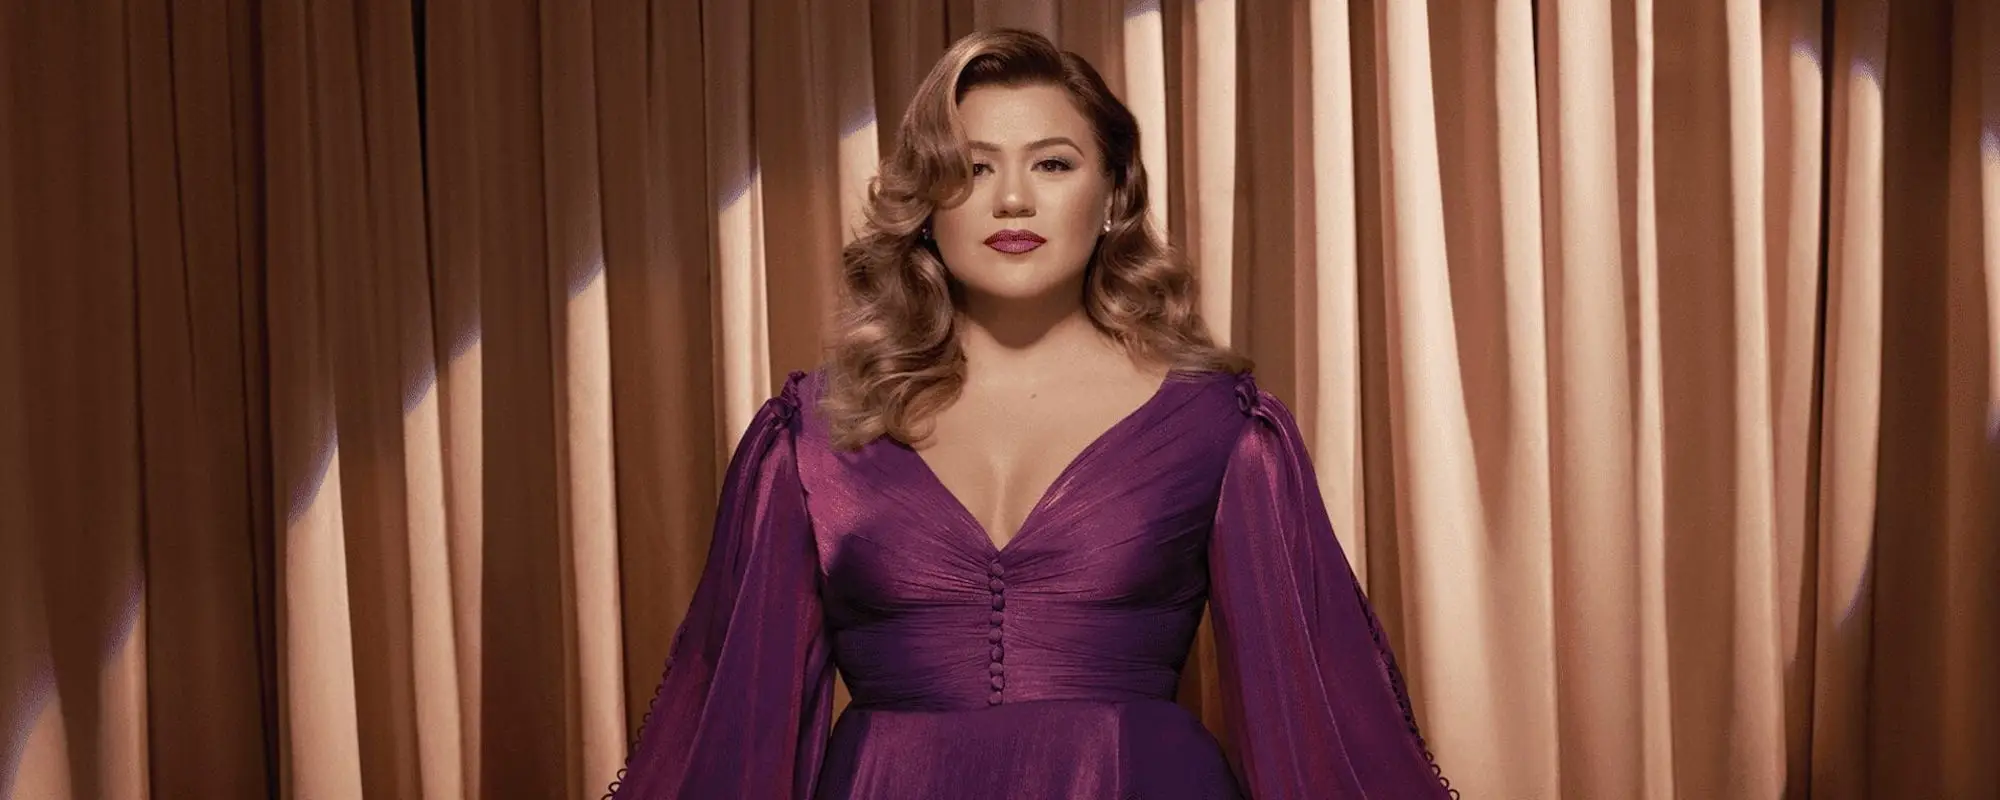 Kelly Clarkson Covers ABBA, Backstreet Boys, Don McLean, and More